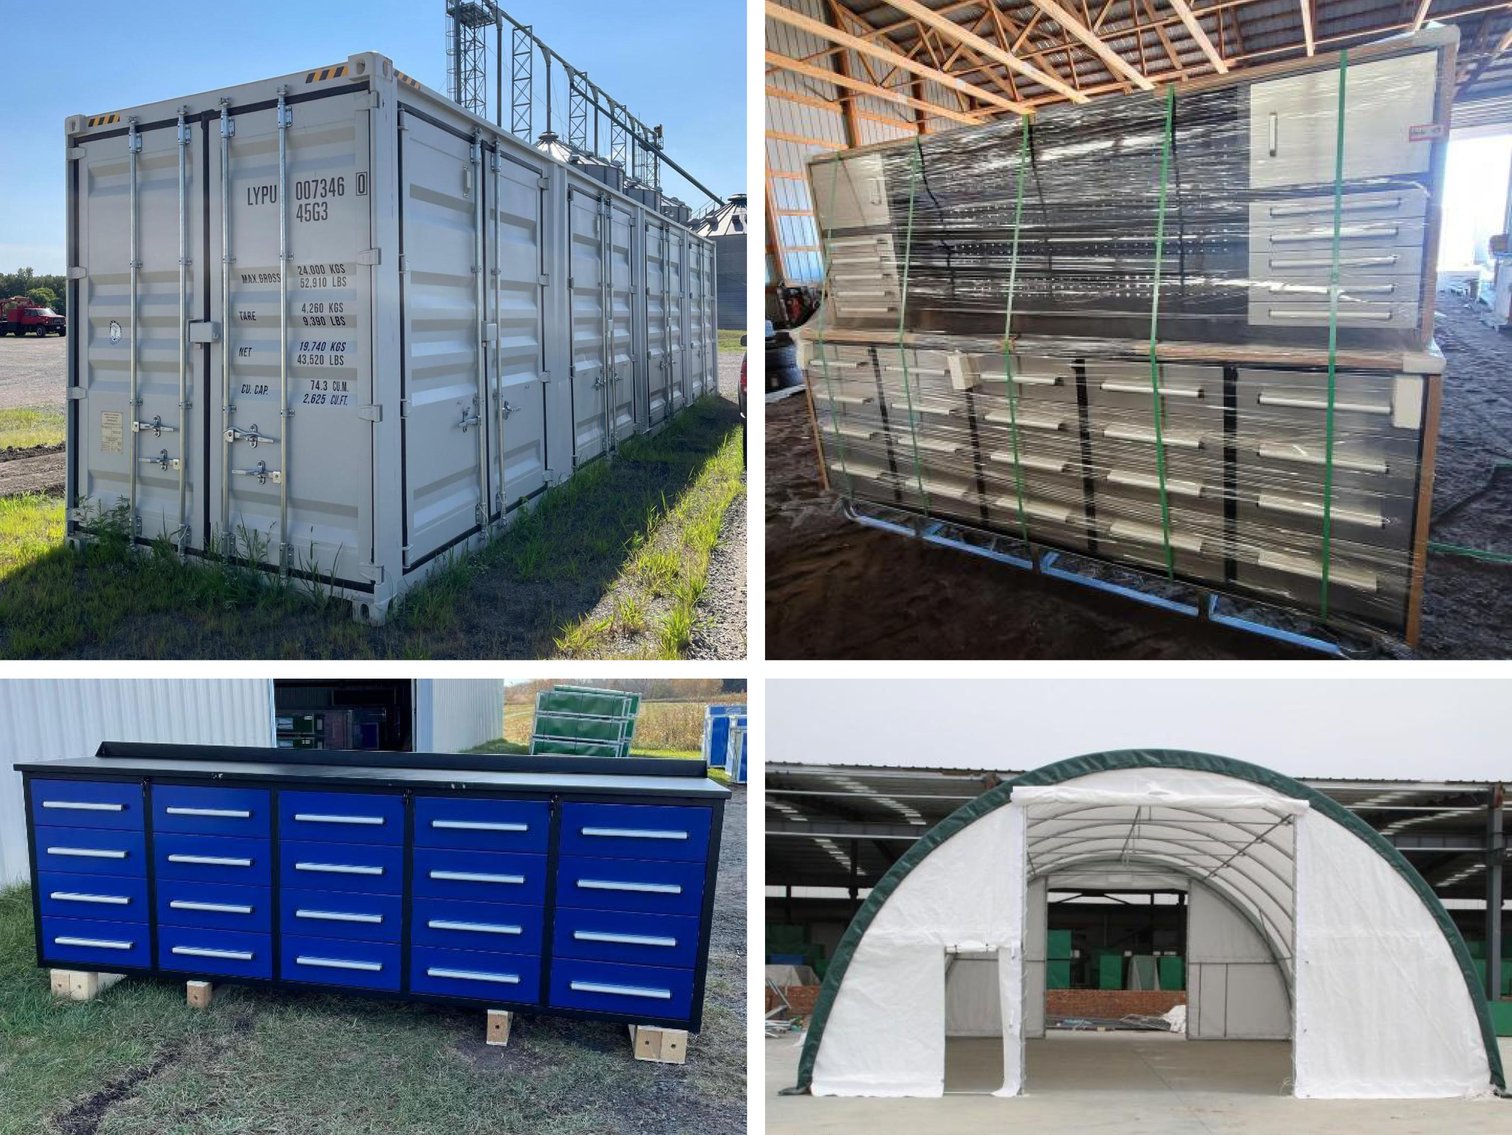 New Storage Buildings, Attachments, Tool Boxes, Tires and 5-Door Sea Container